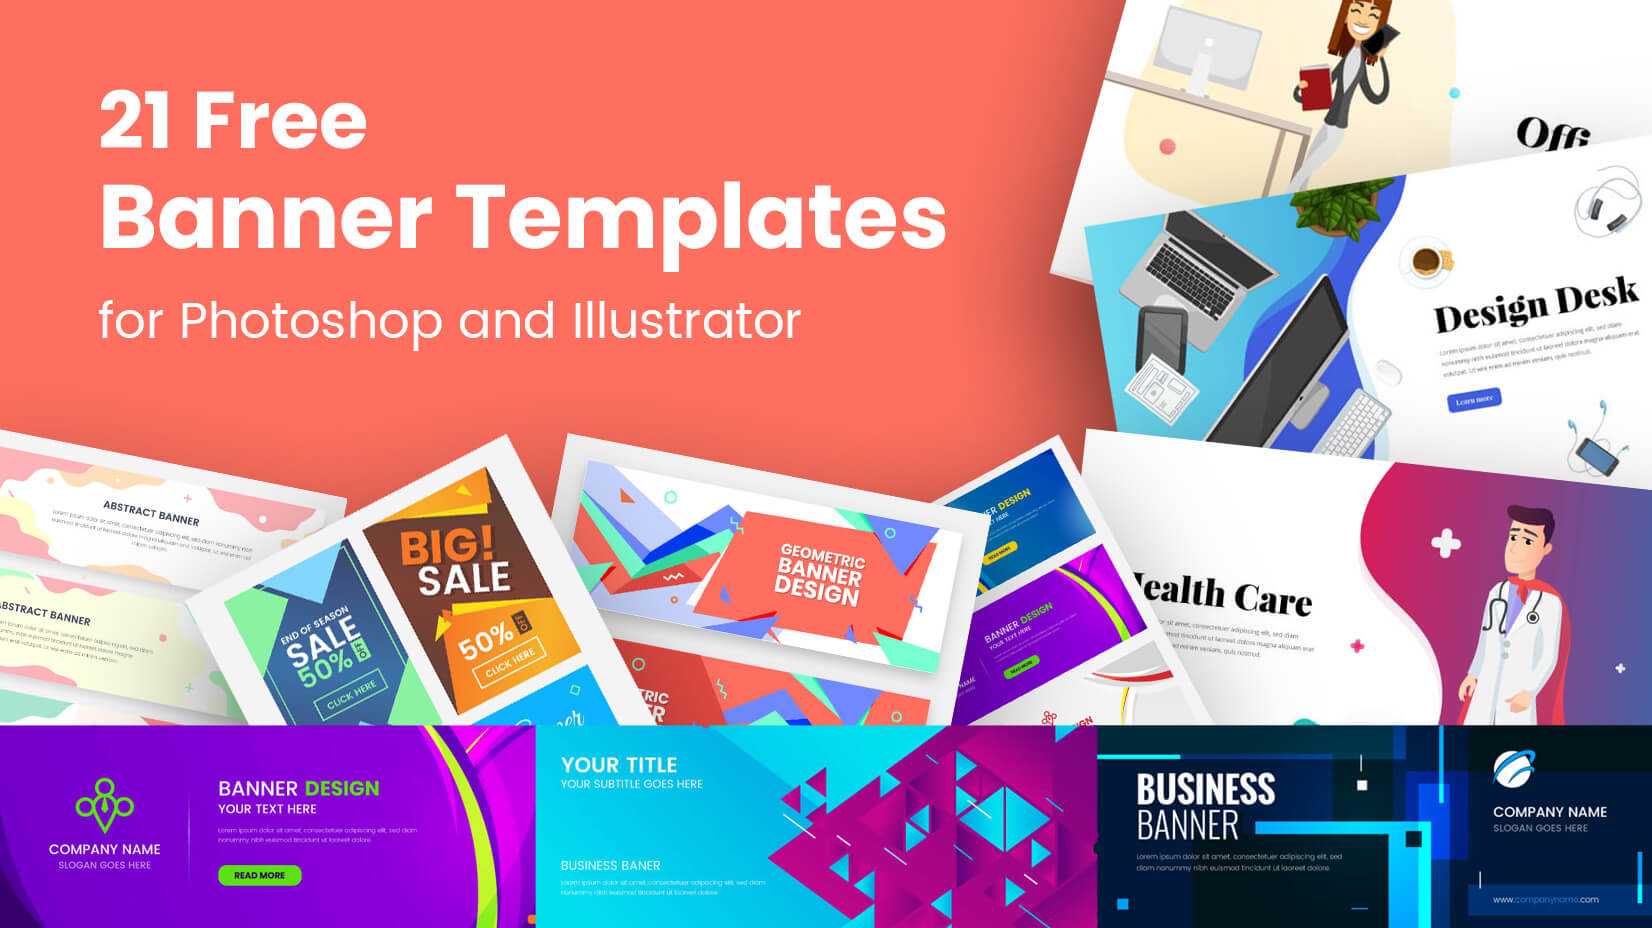 21 Free Banner Templates For Photoshop And Illustrator Inside Adobe Photoshop Banner Templates